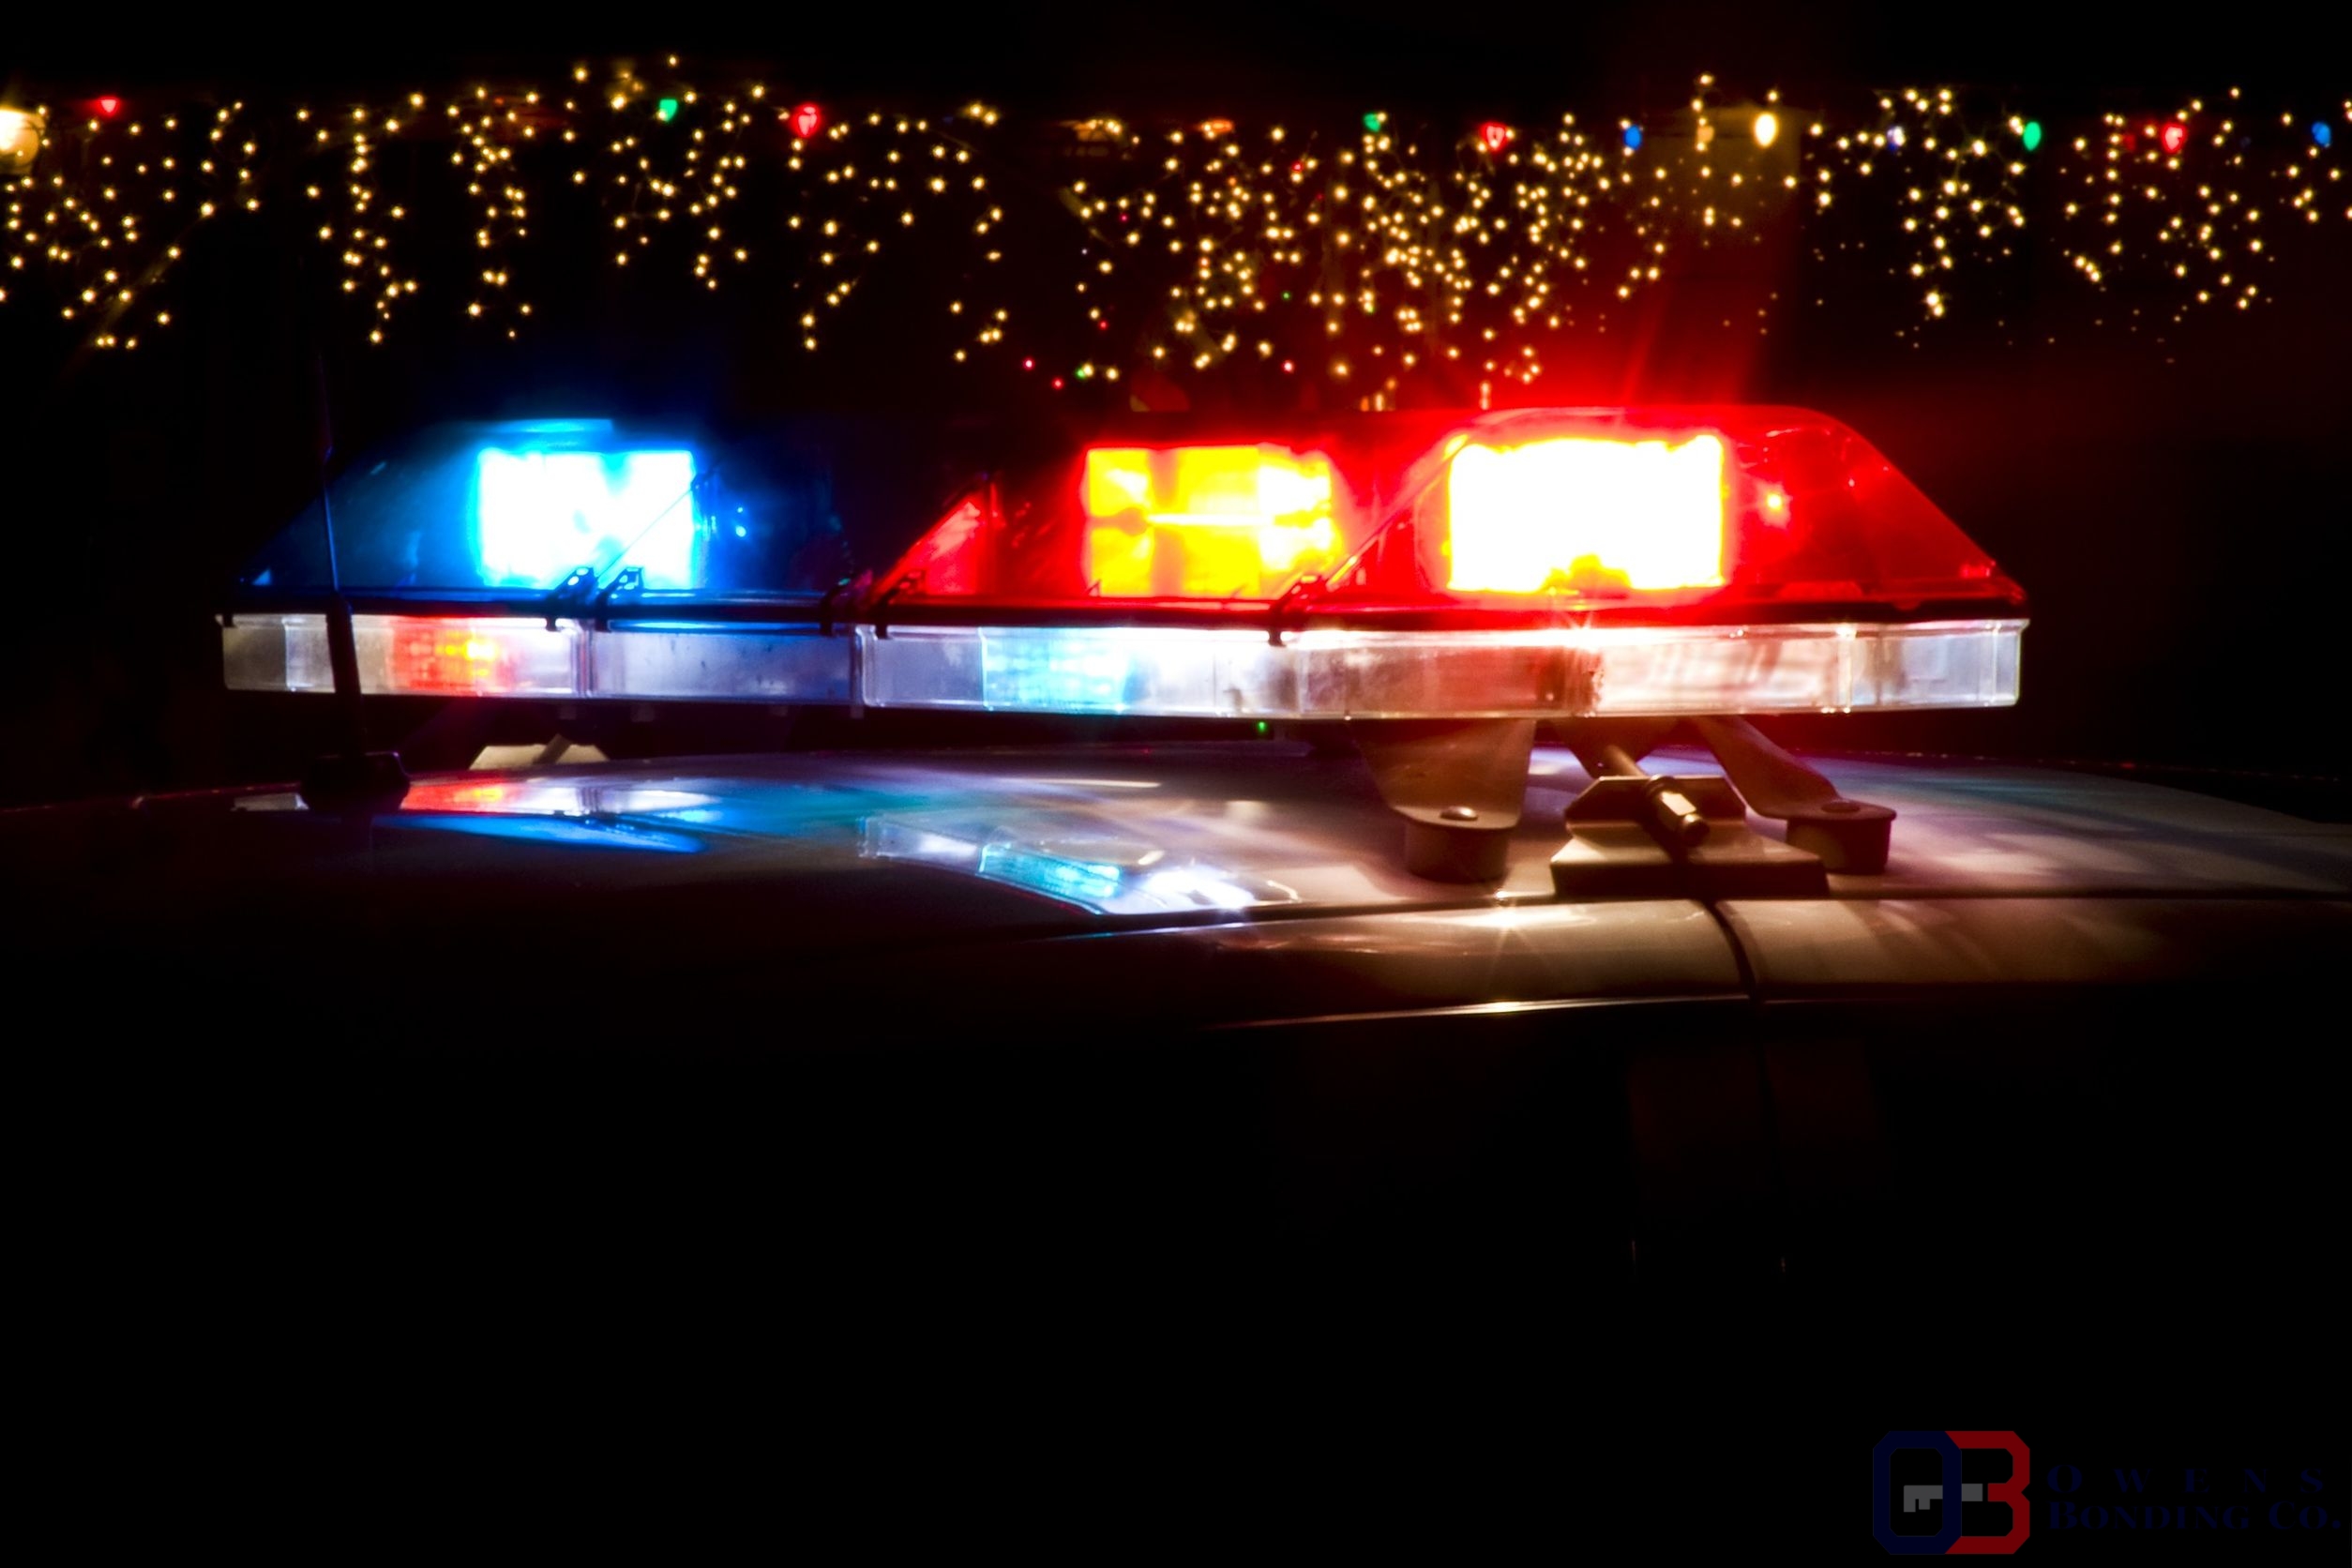 police car light bar in front of Christmas decorations